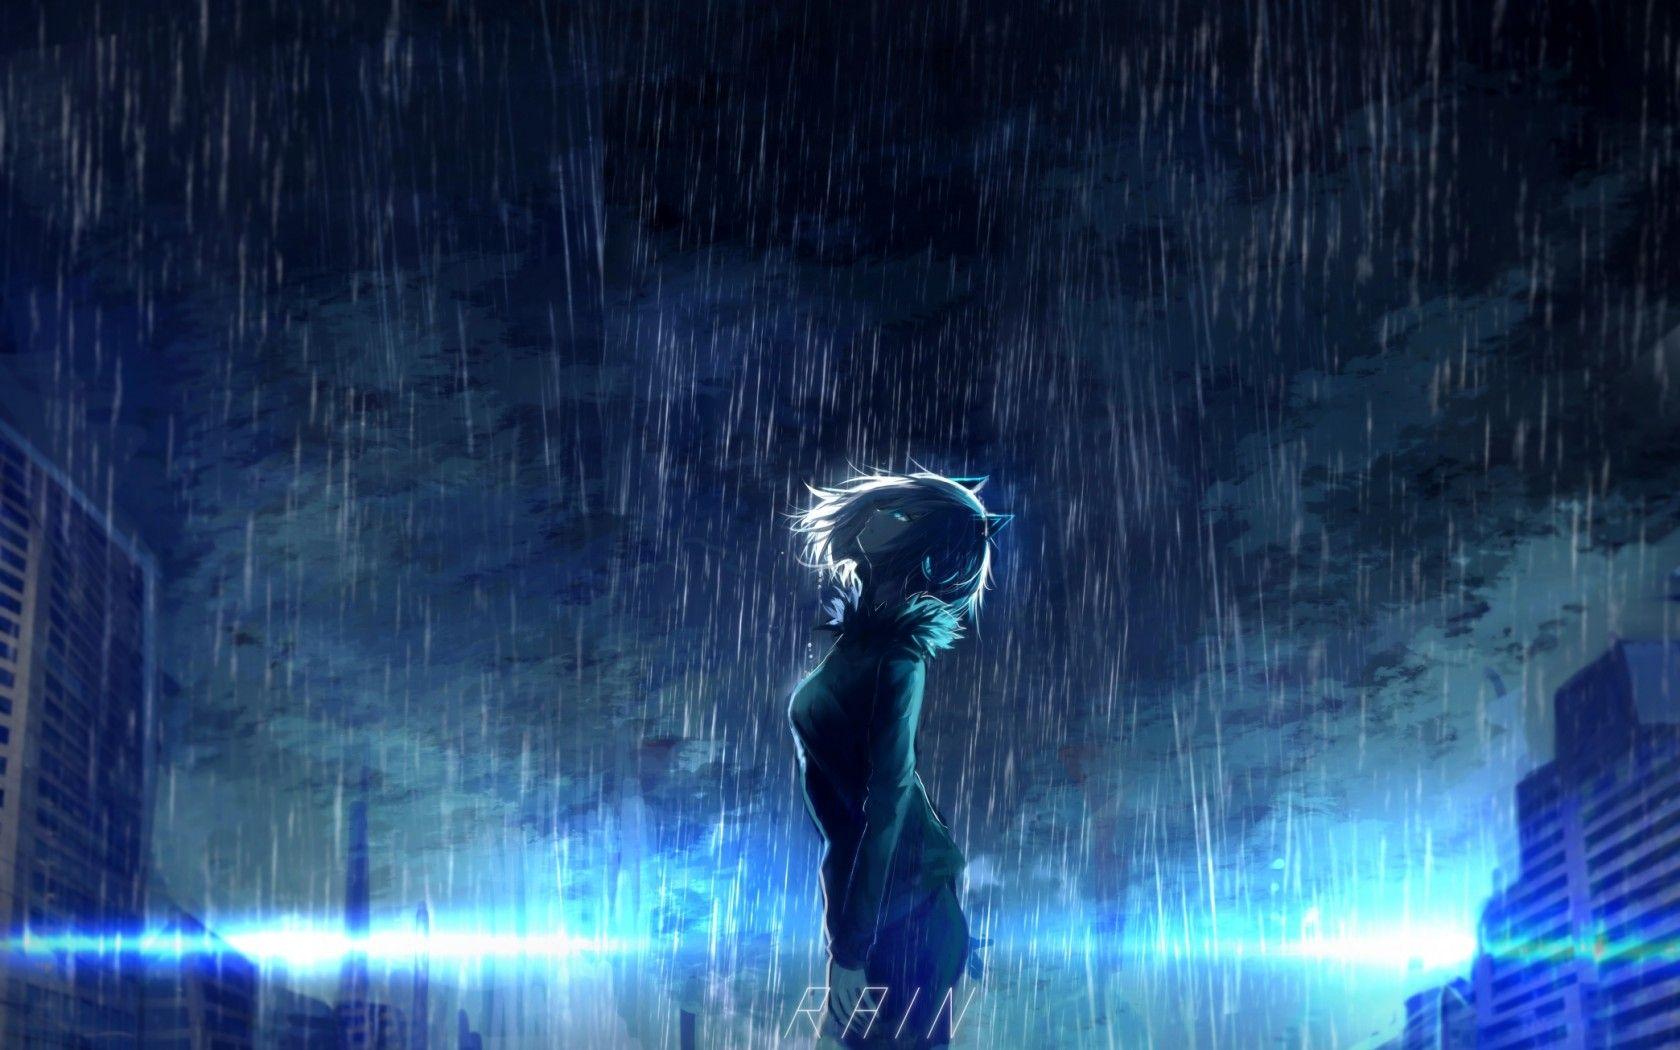 After the rain, we run on [by 雪町] : ImaginarySliceOfLife  Anime  backgrounds wallpapers, Anime scenery wallpaper, Anime scenery